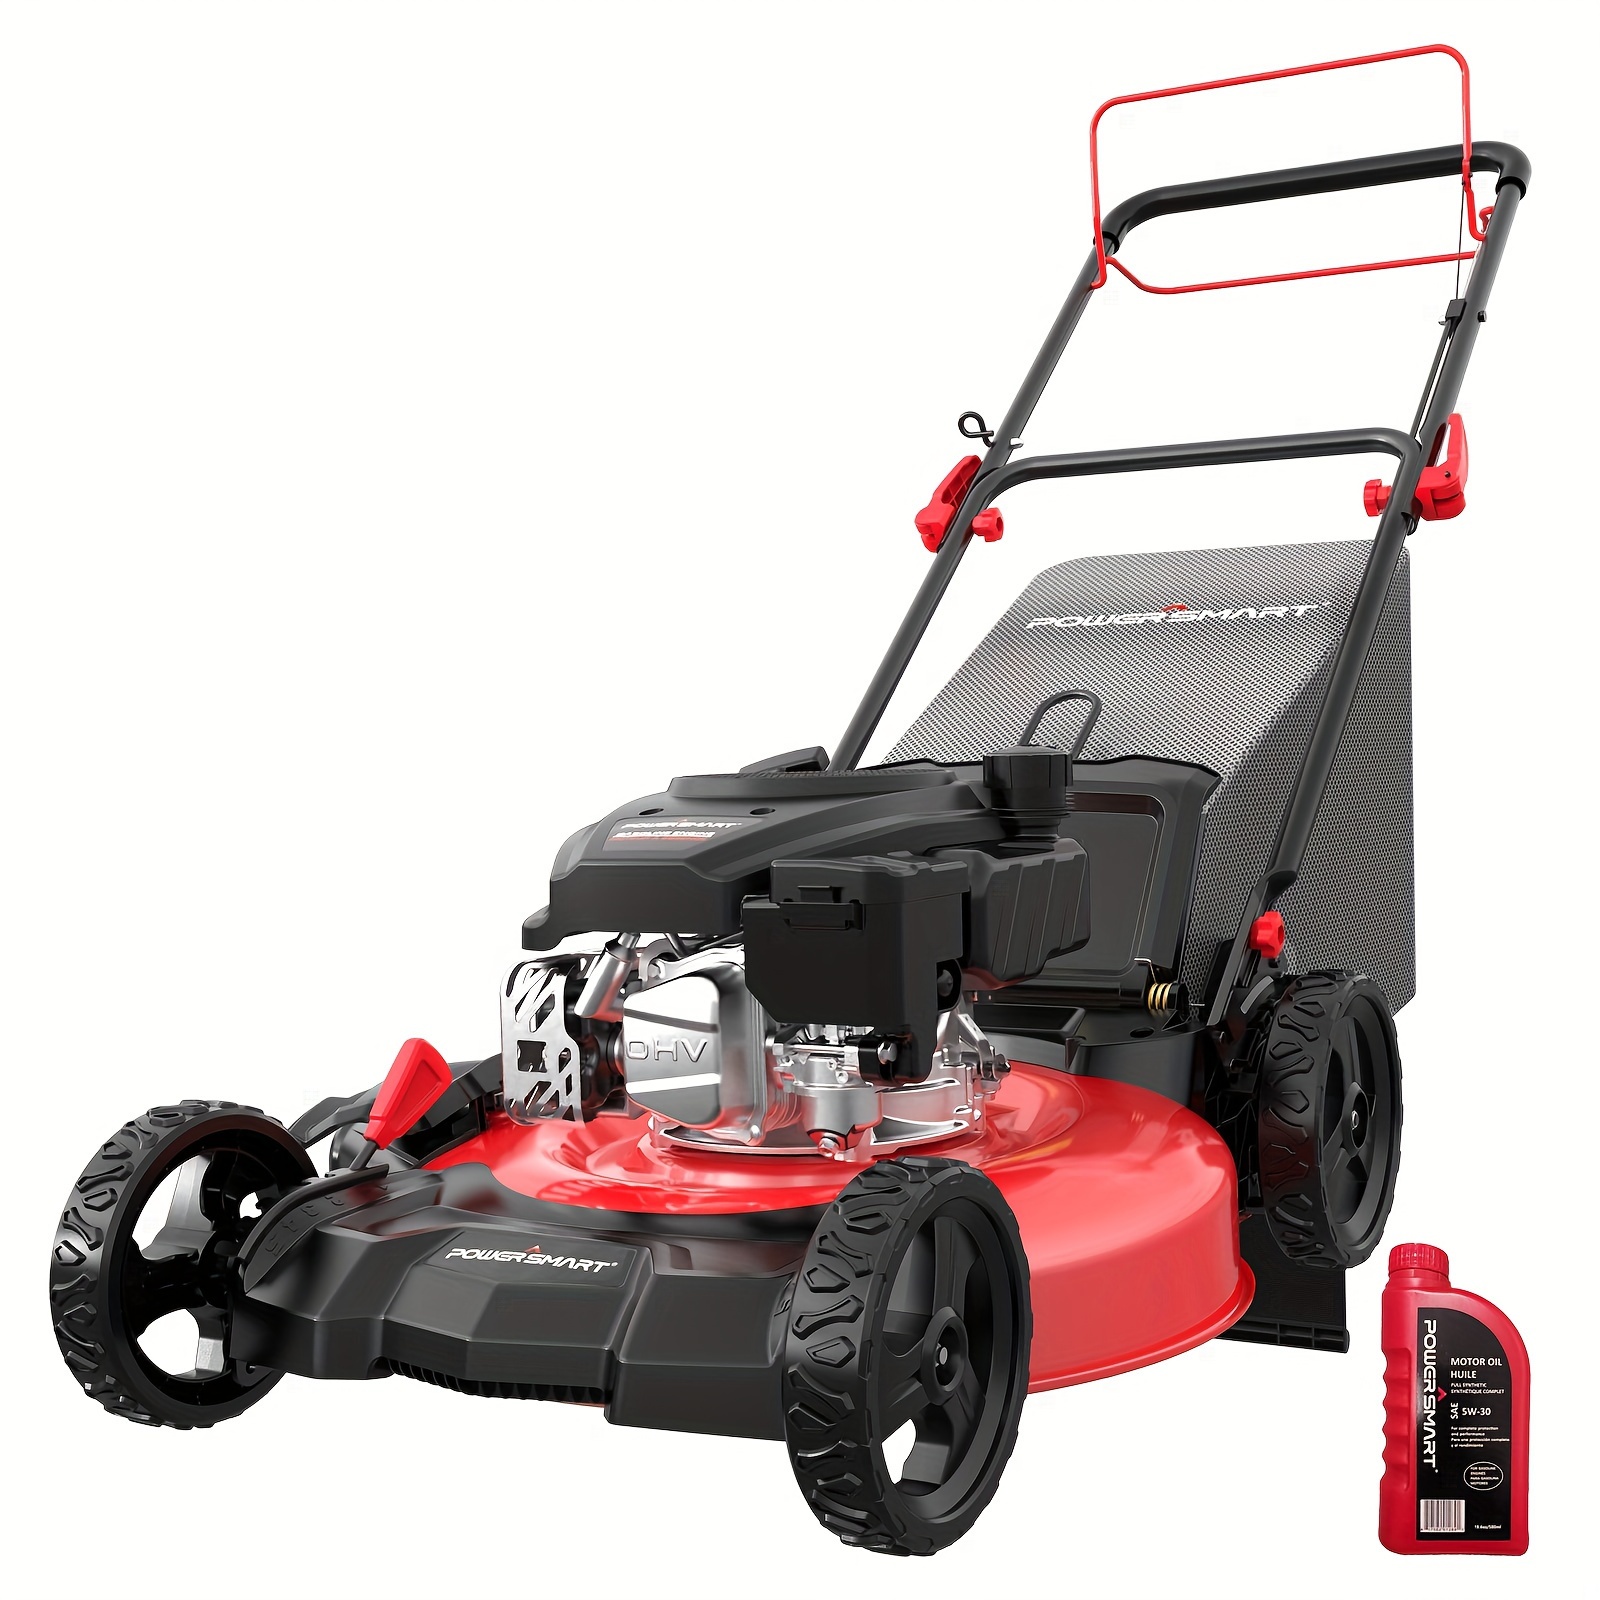 

Powersmart Self Propelled Gas Lawn Mower 21in. 170cc Gas Engine 3-in-1 Mulch, Bag, Side Discharge, 6-position Height Adjustment